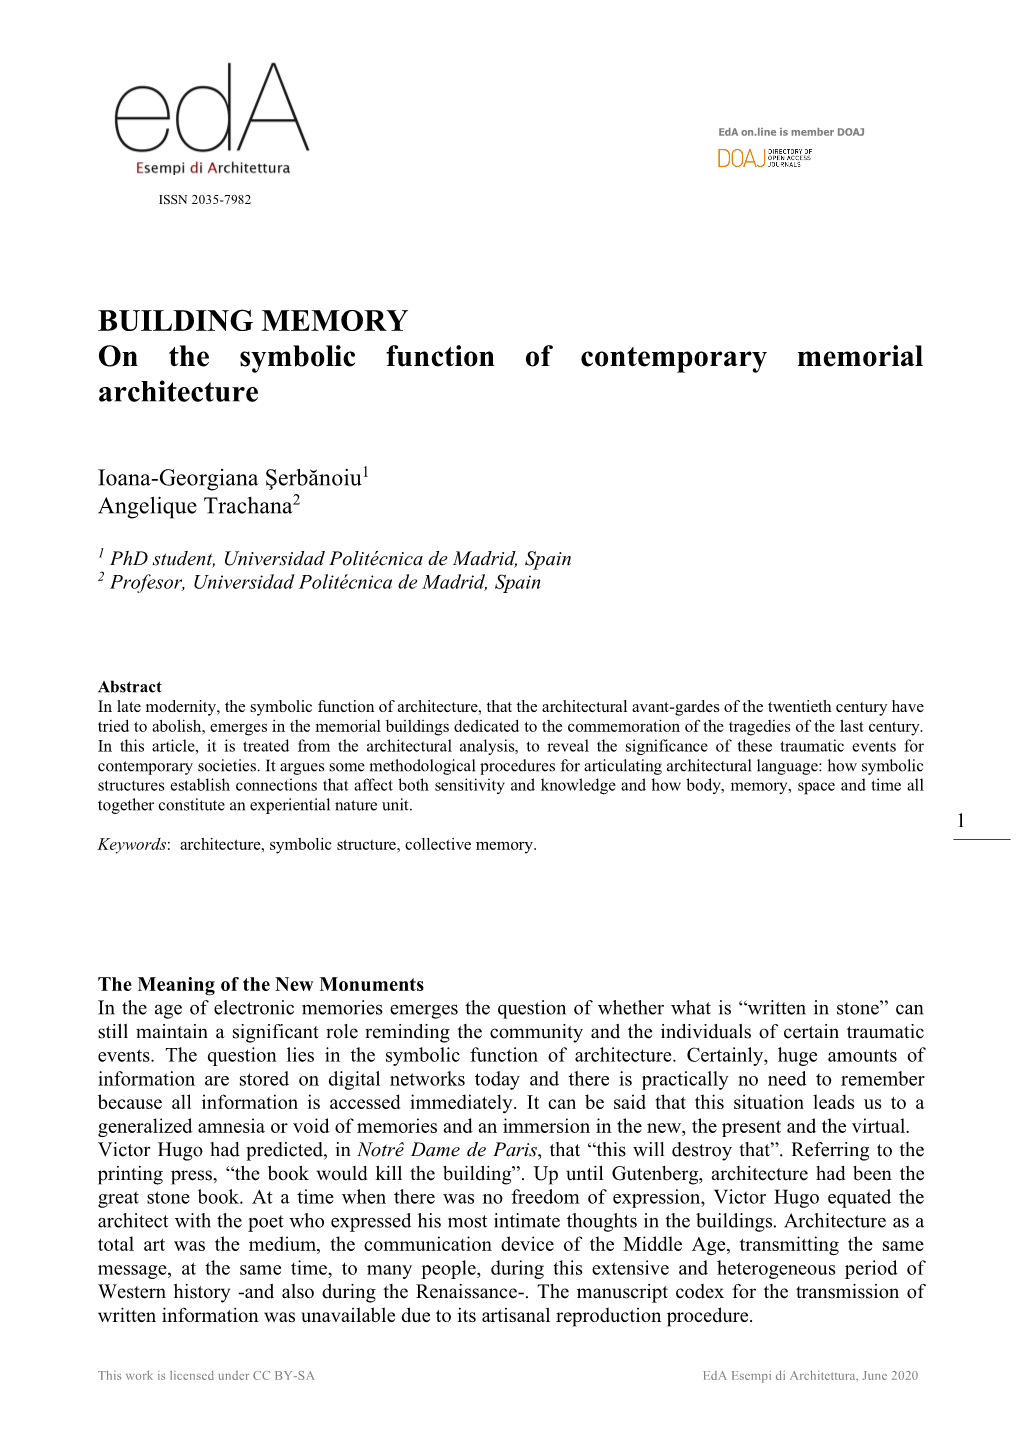 BUILDING MEMORY on the Symbolic Function of Contemporary Memorial Architecture